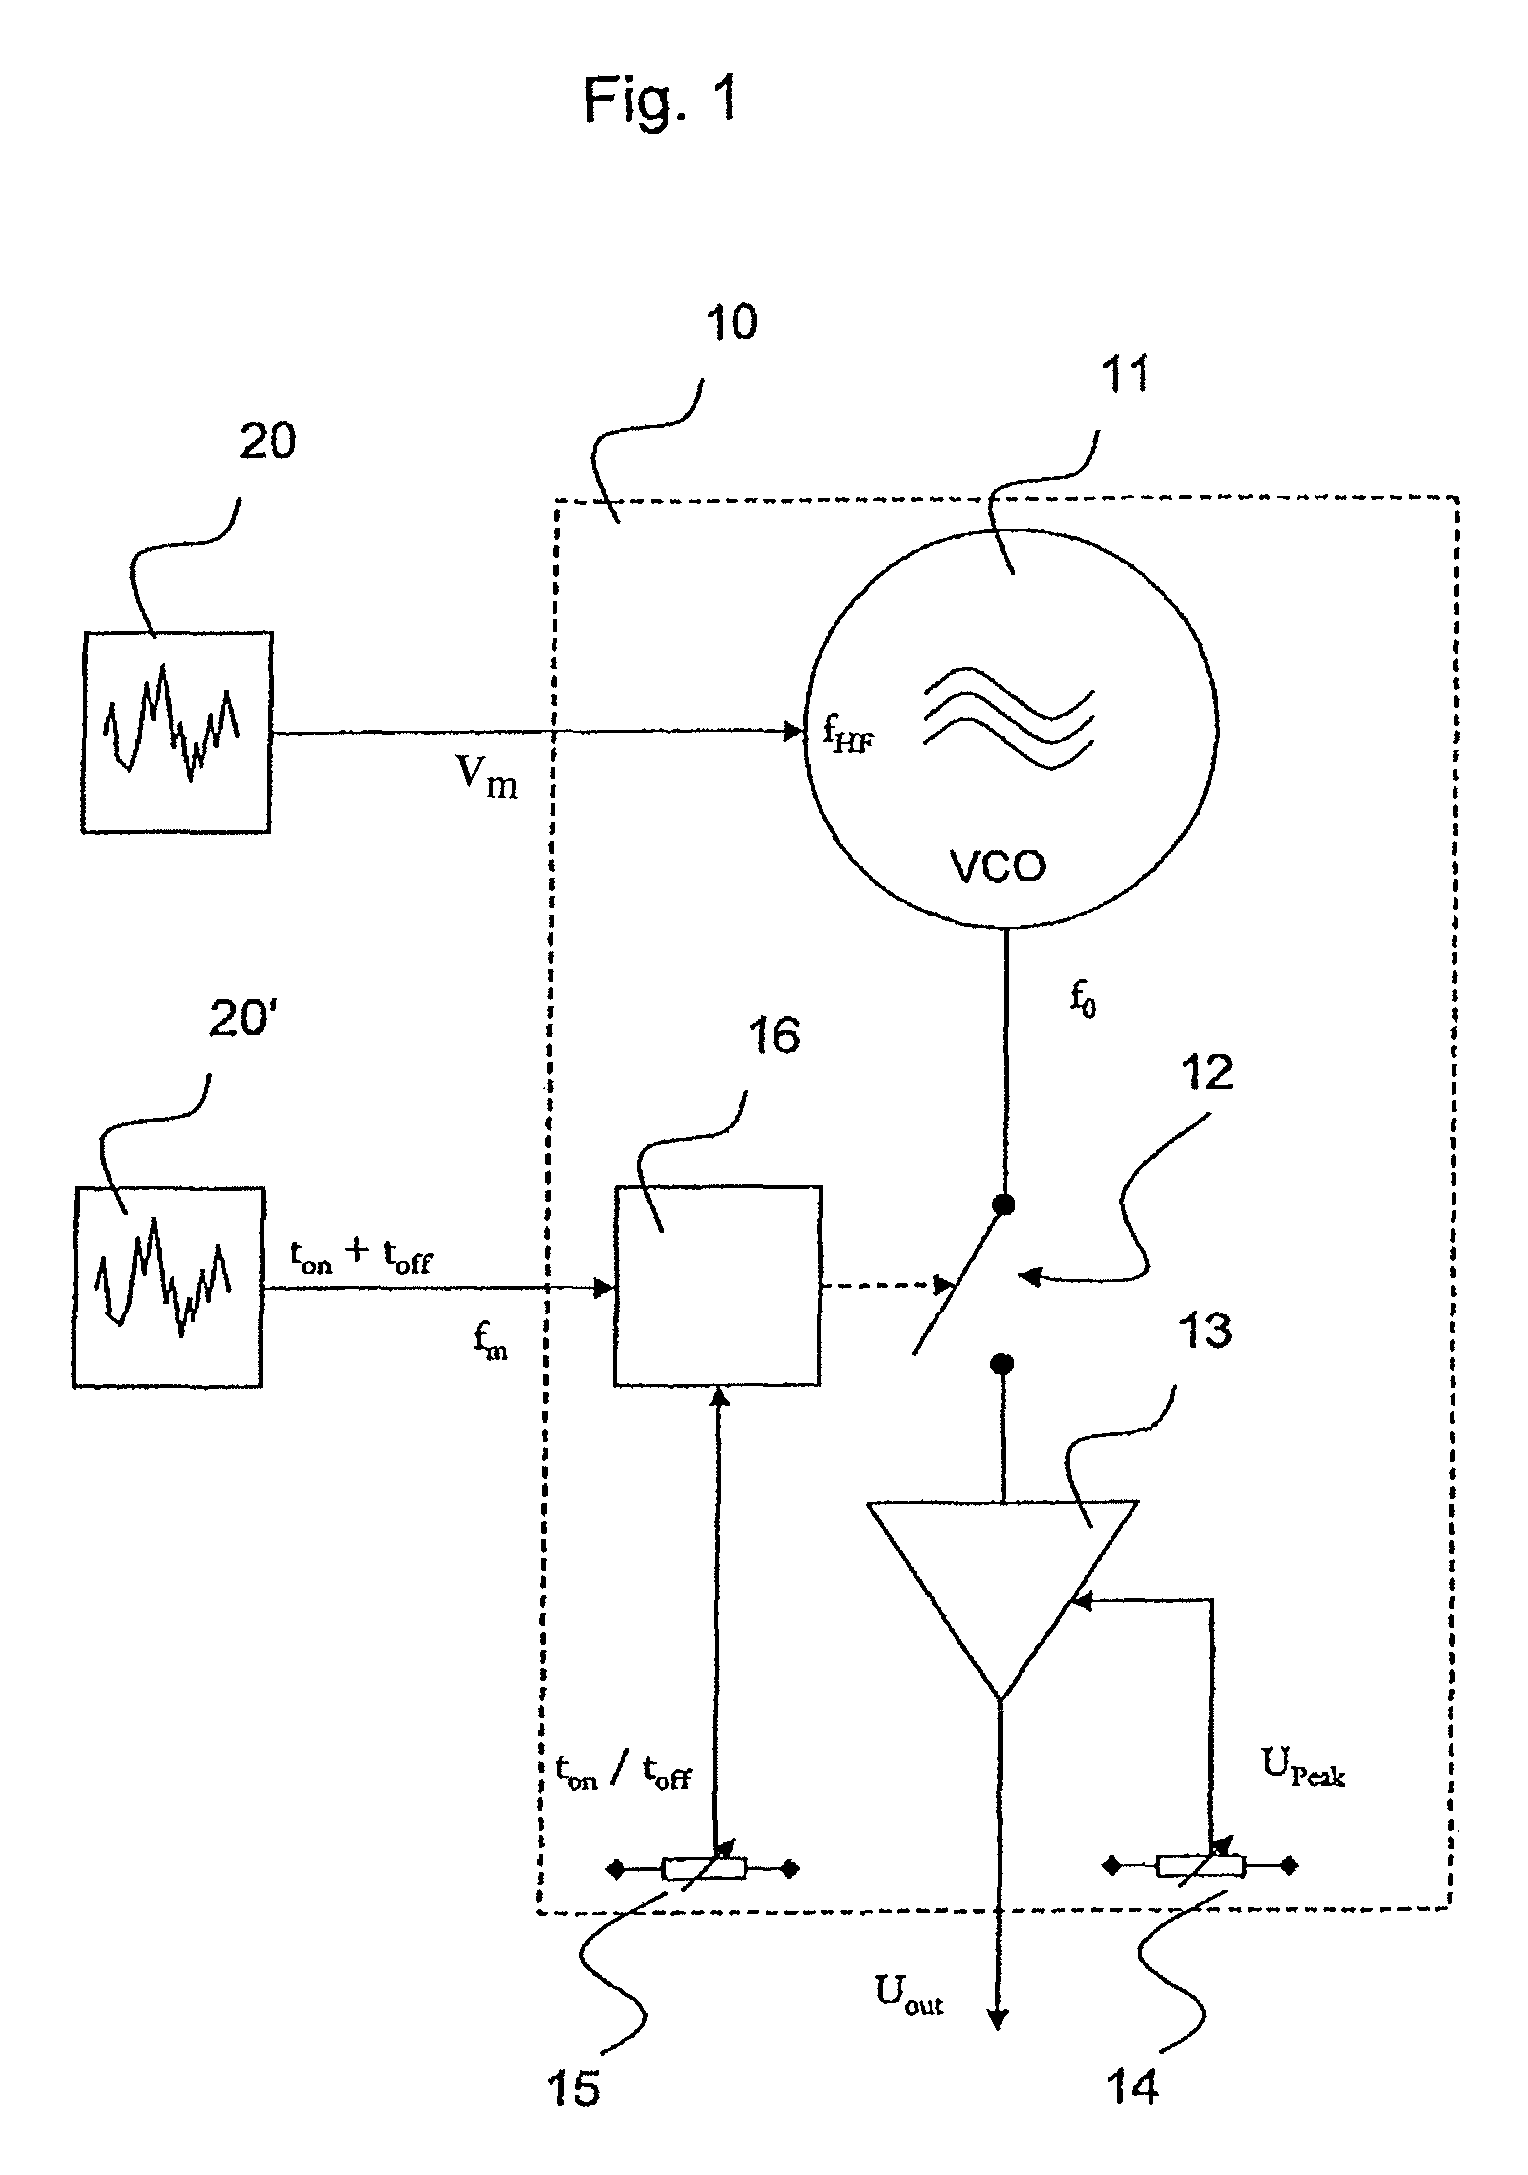 Method for controlling an electro-surgical HF generator and electro-surgical device